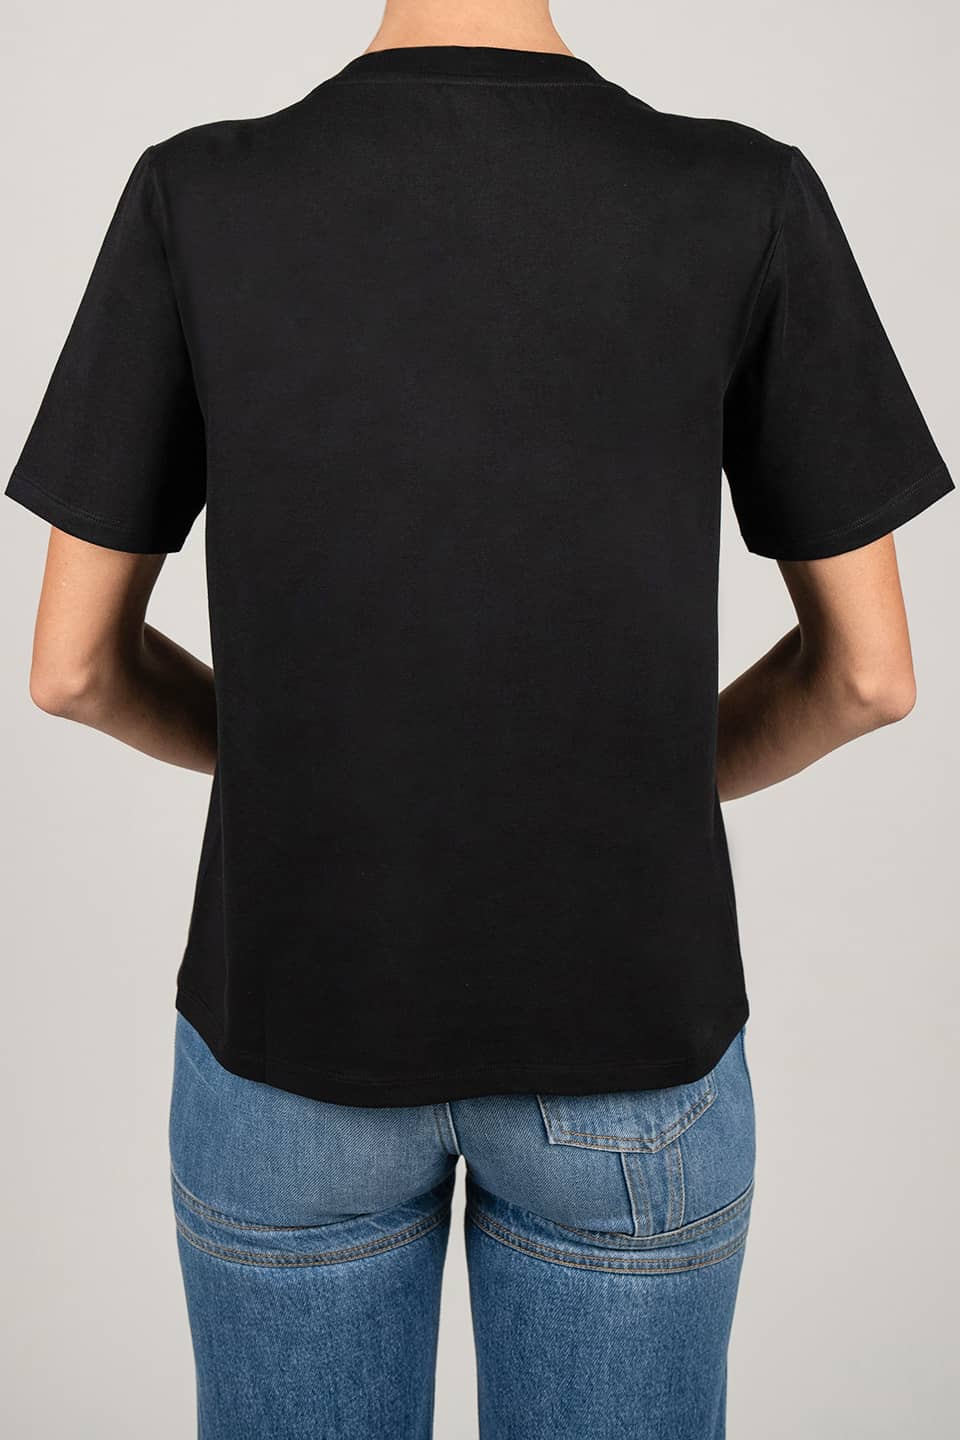 Designer Black T-shirt, shop online with free delivery in UAE. Product gallery 3